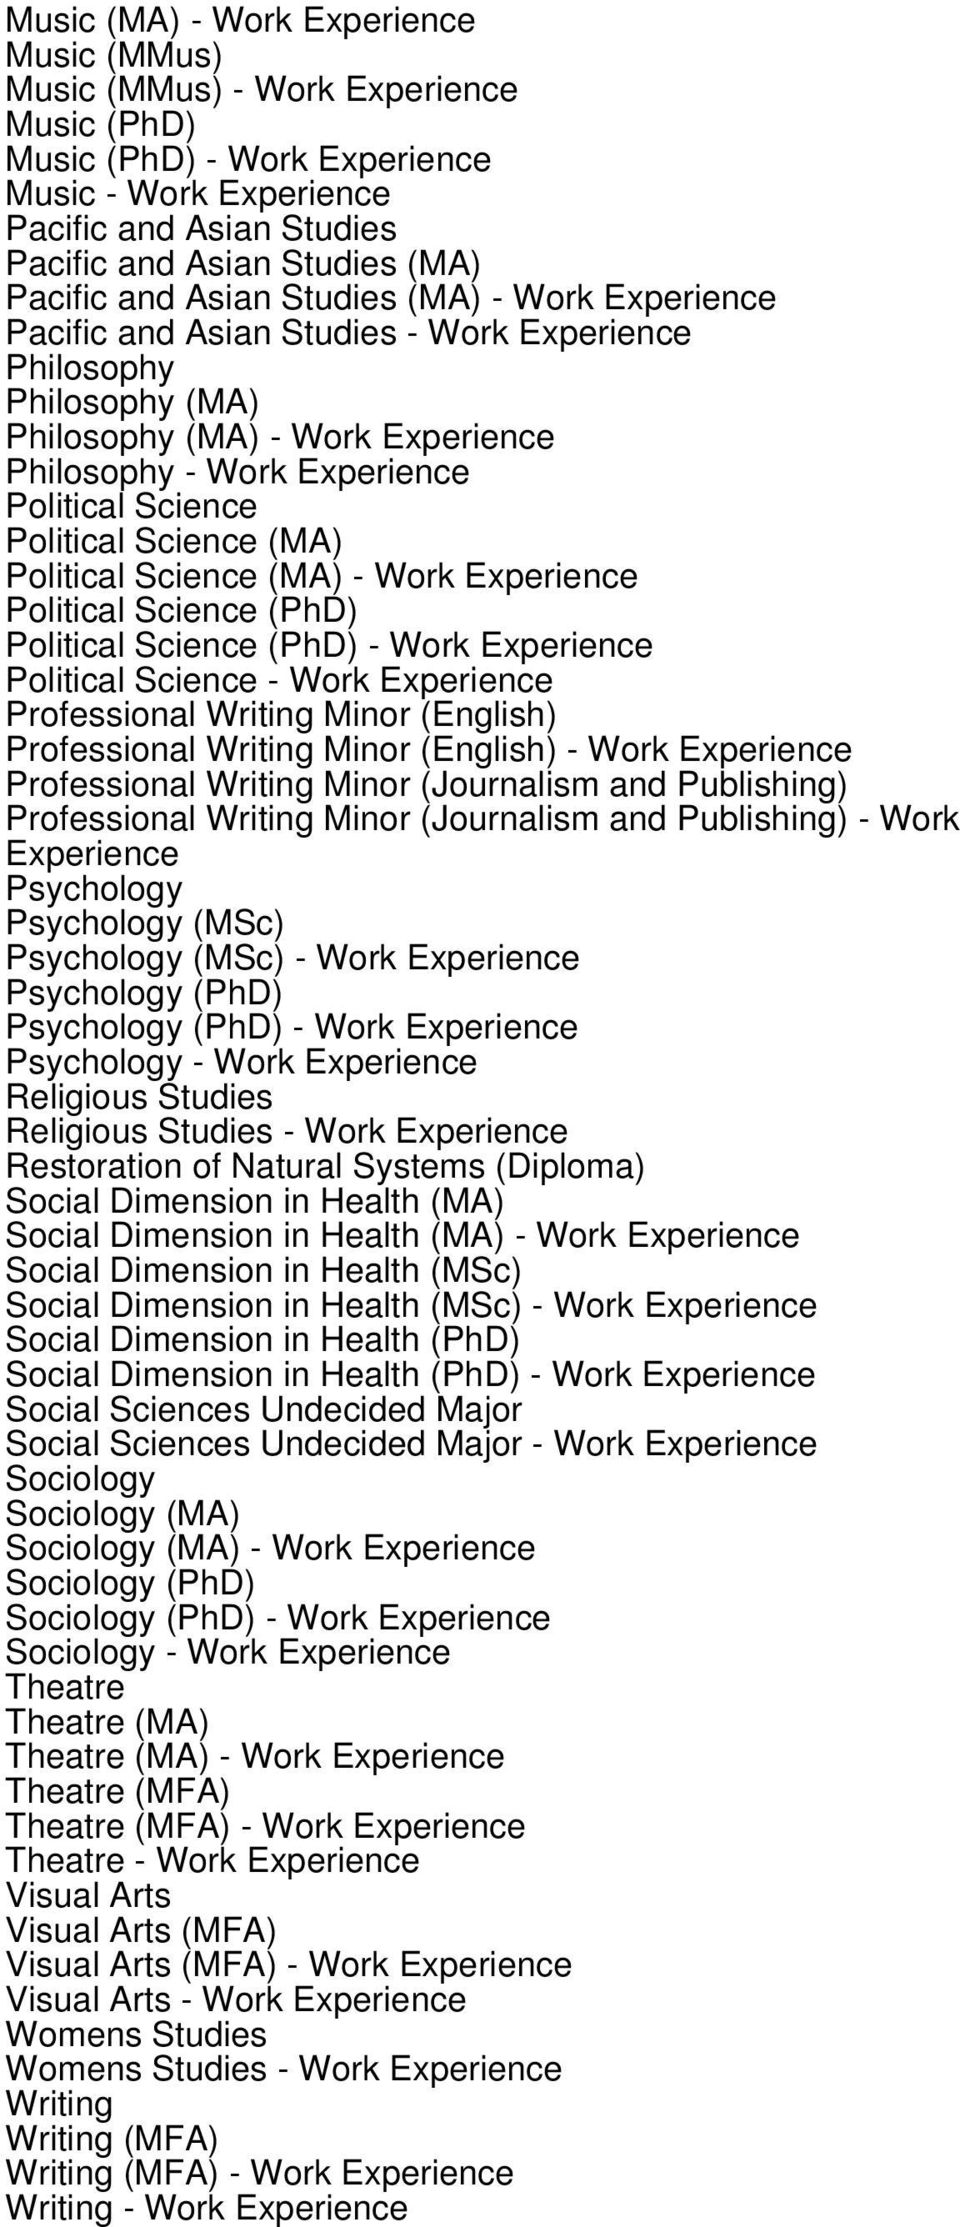 Science Political Science (MA) Political Science (MA) - Work Experience Political Science (PhD) Political Science (PhD) - Work Experience Political Science - Work Experience Professional Writing